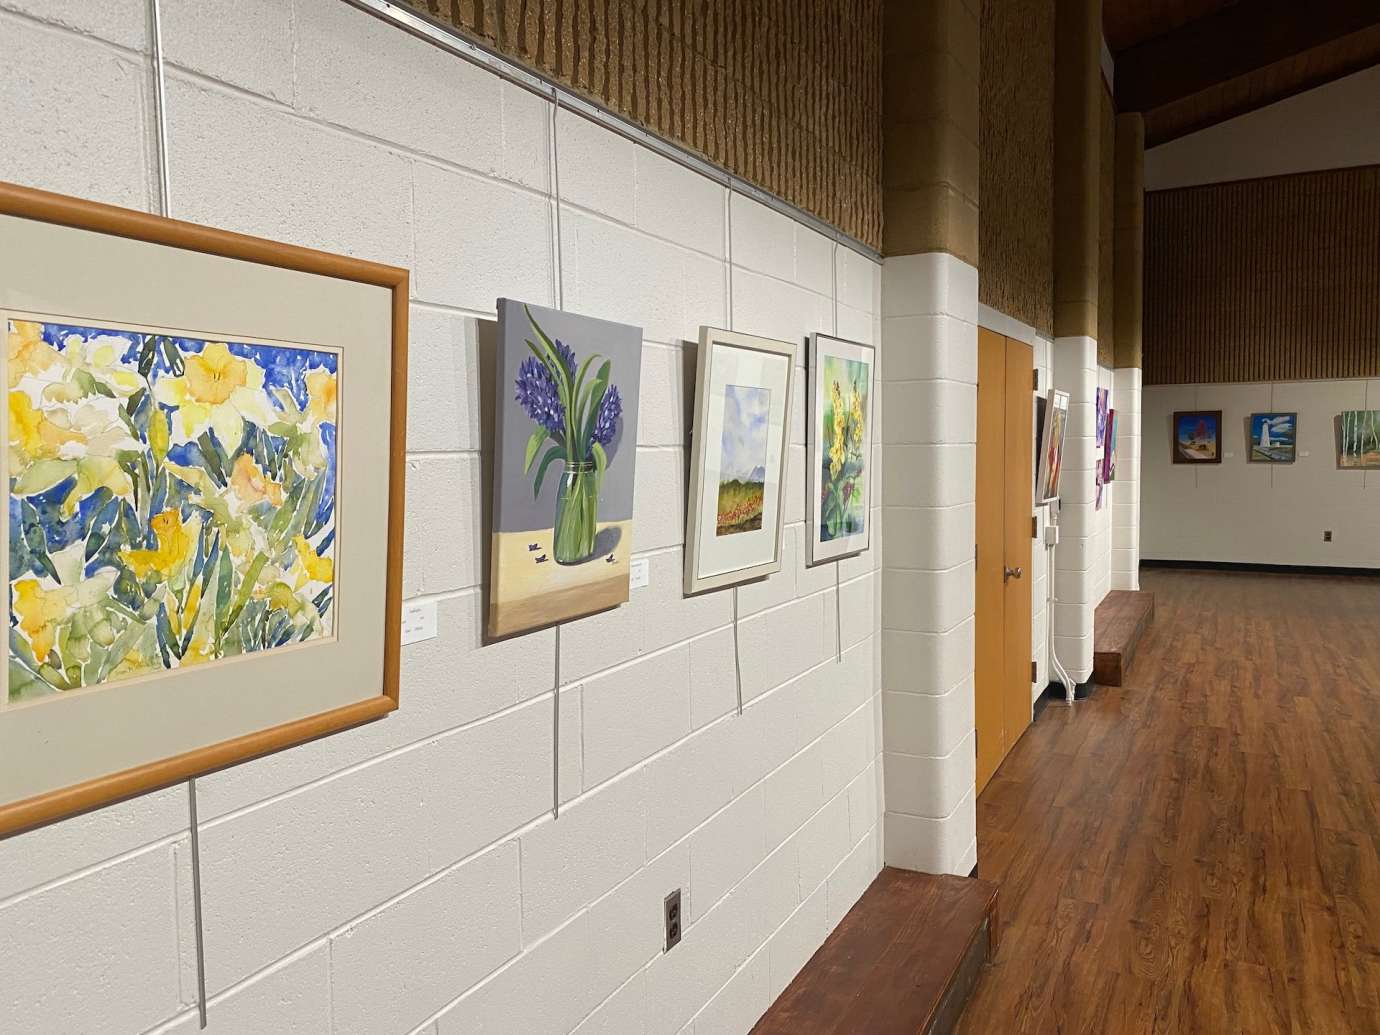 Sertoma Park Artist Association Exhibition - paintings hanging on wall